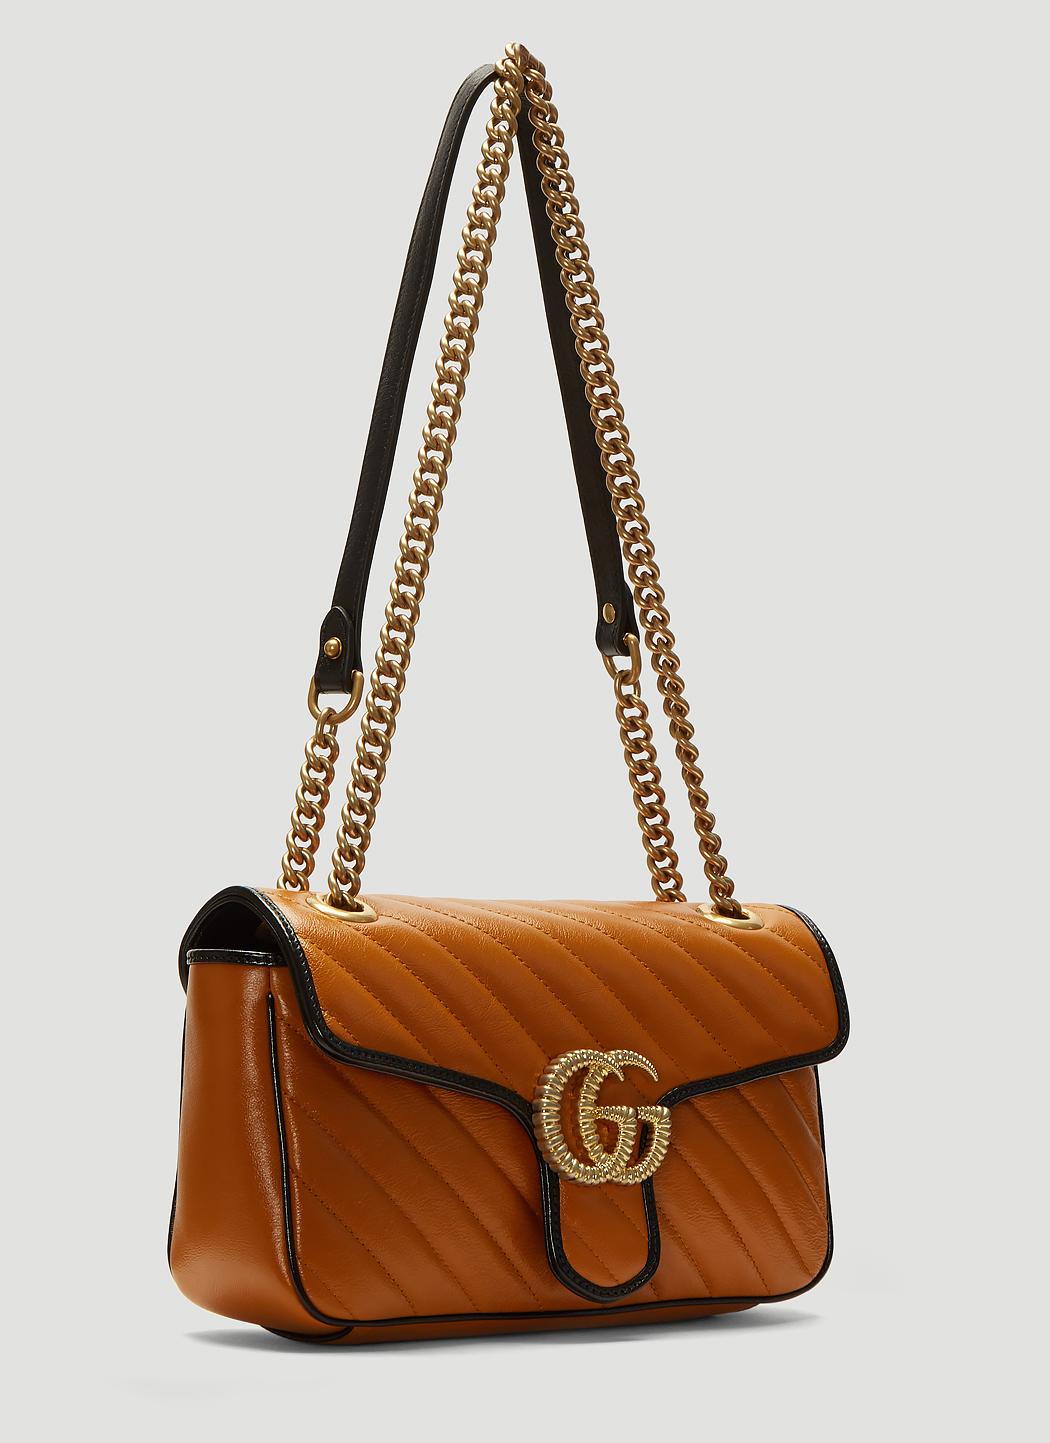 Gucci Marmont Leather Shoulder Bag In Brown - Lyst